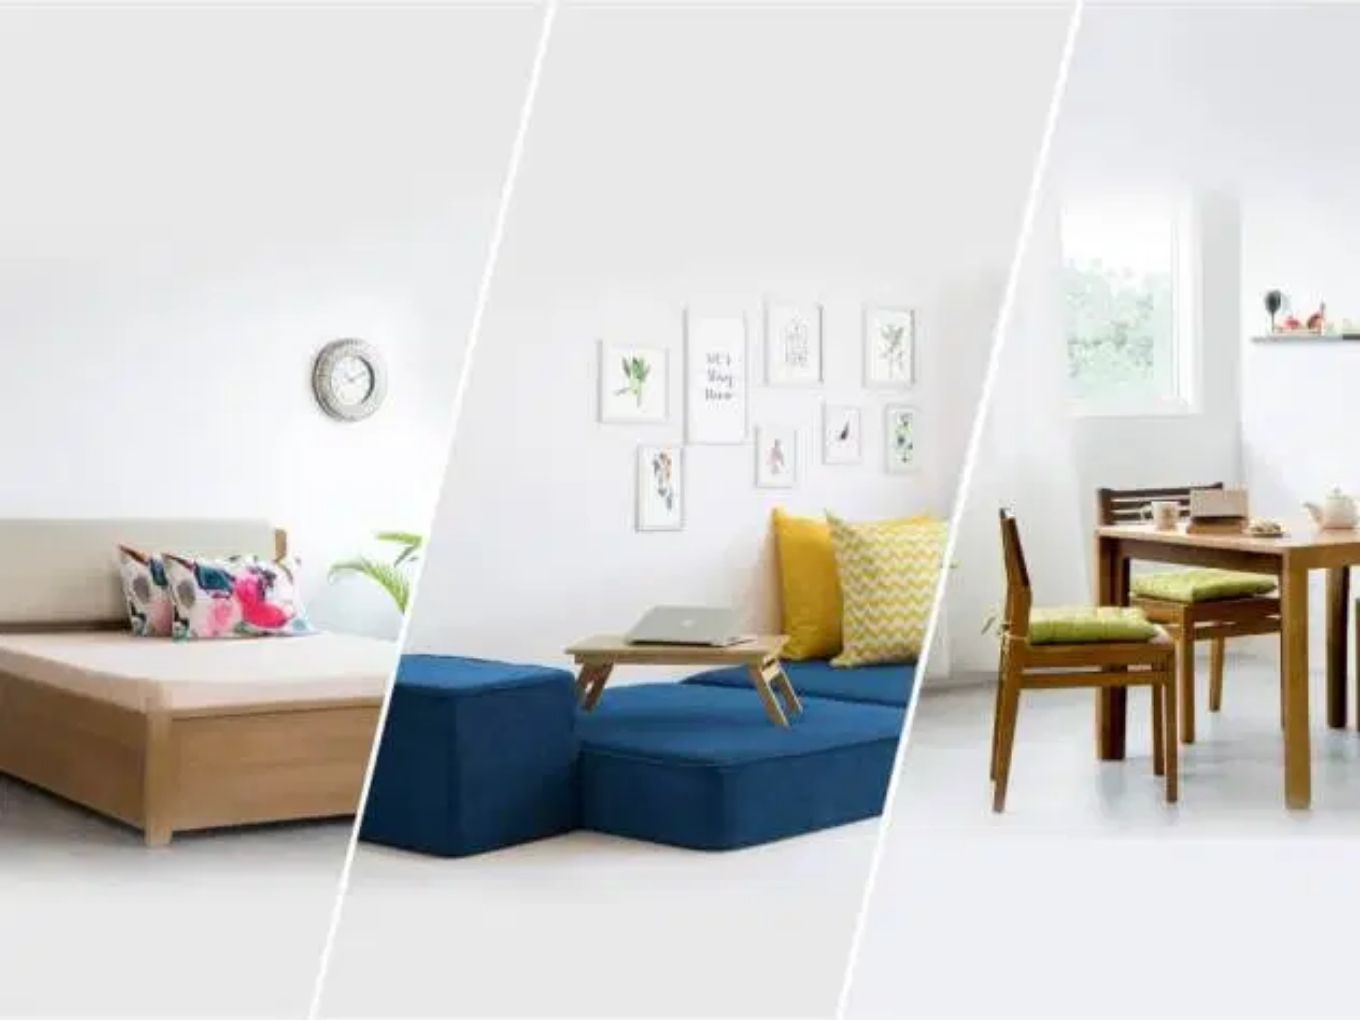 Livspace In Talks To Raise $100 Mn From Kharis Capital, IKEA, Others